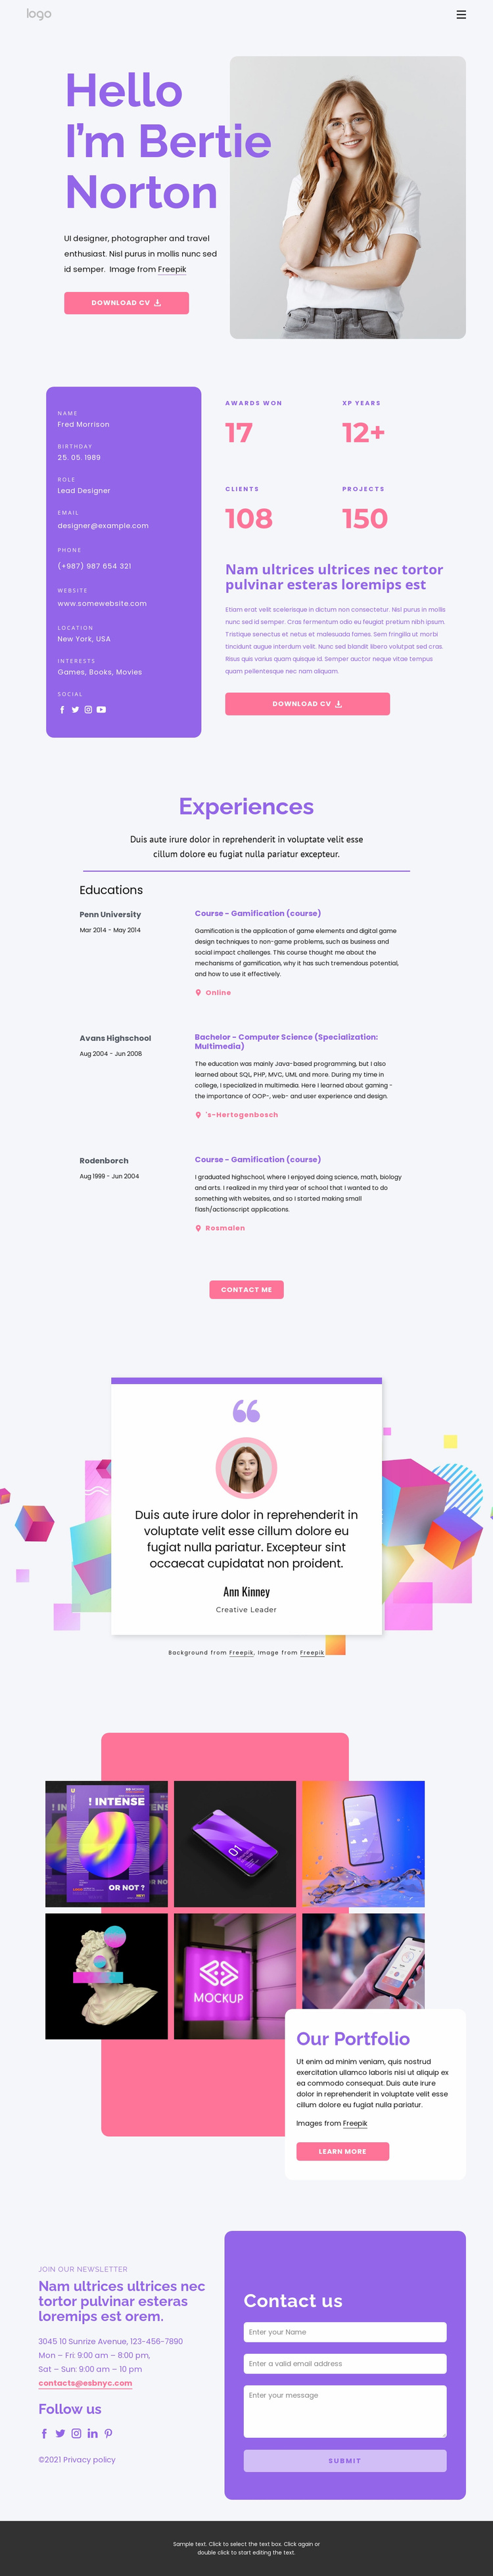 Personal website Landing Page